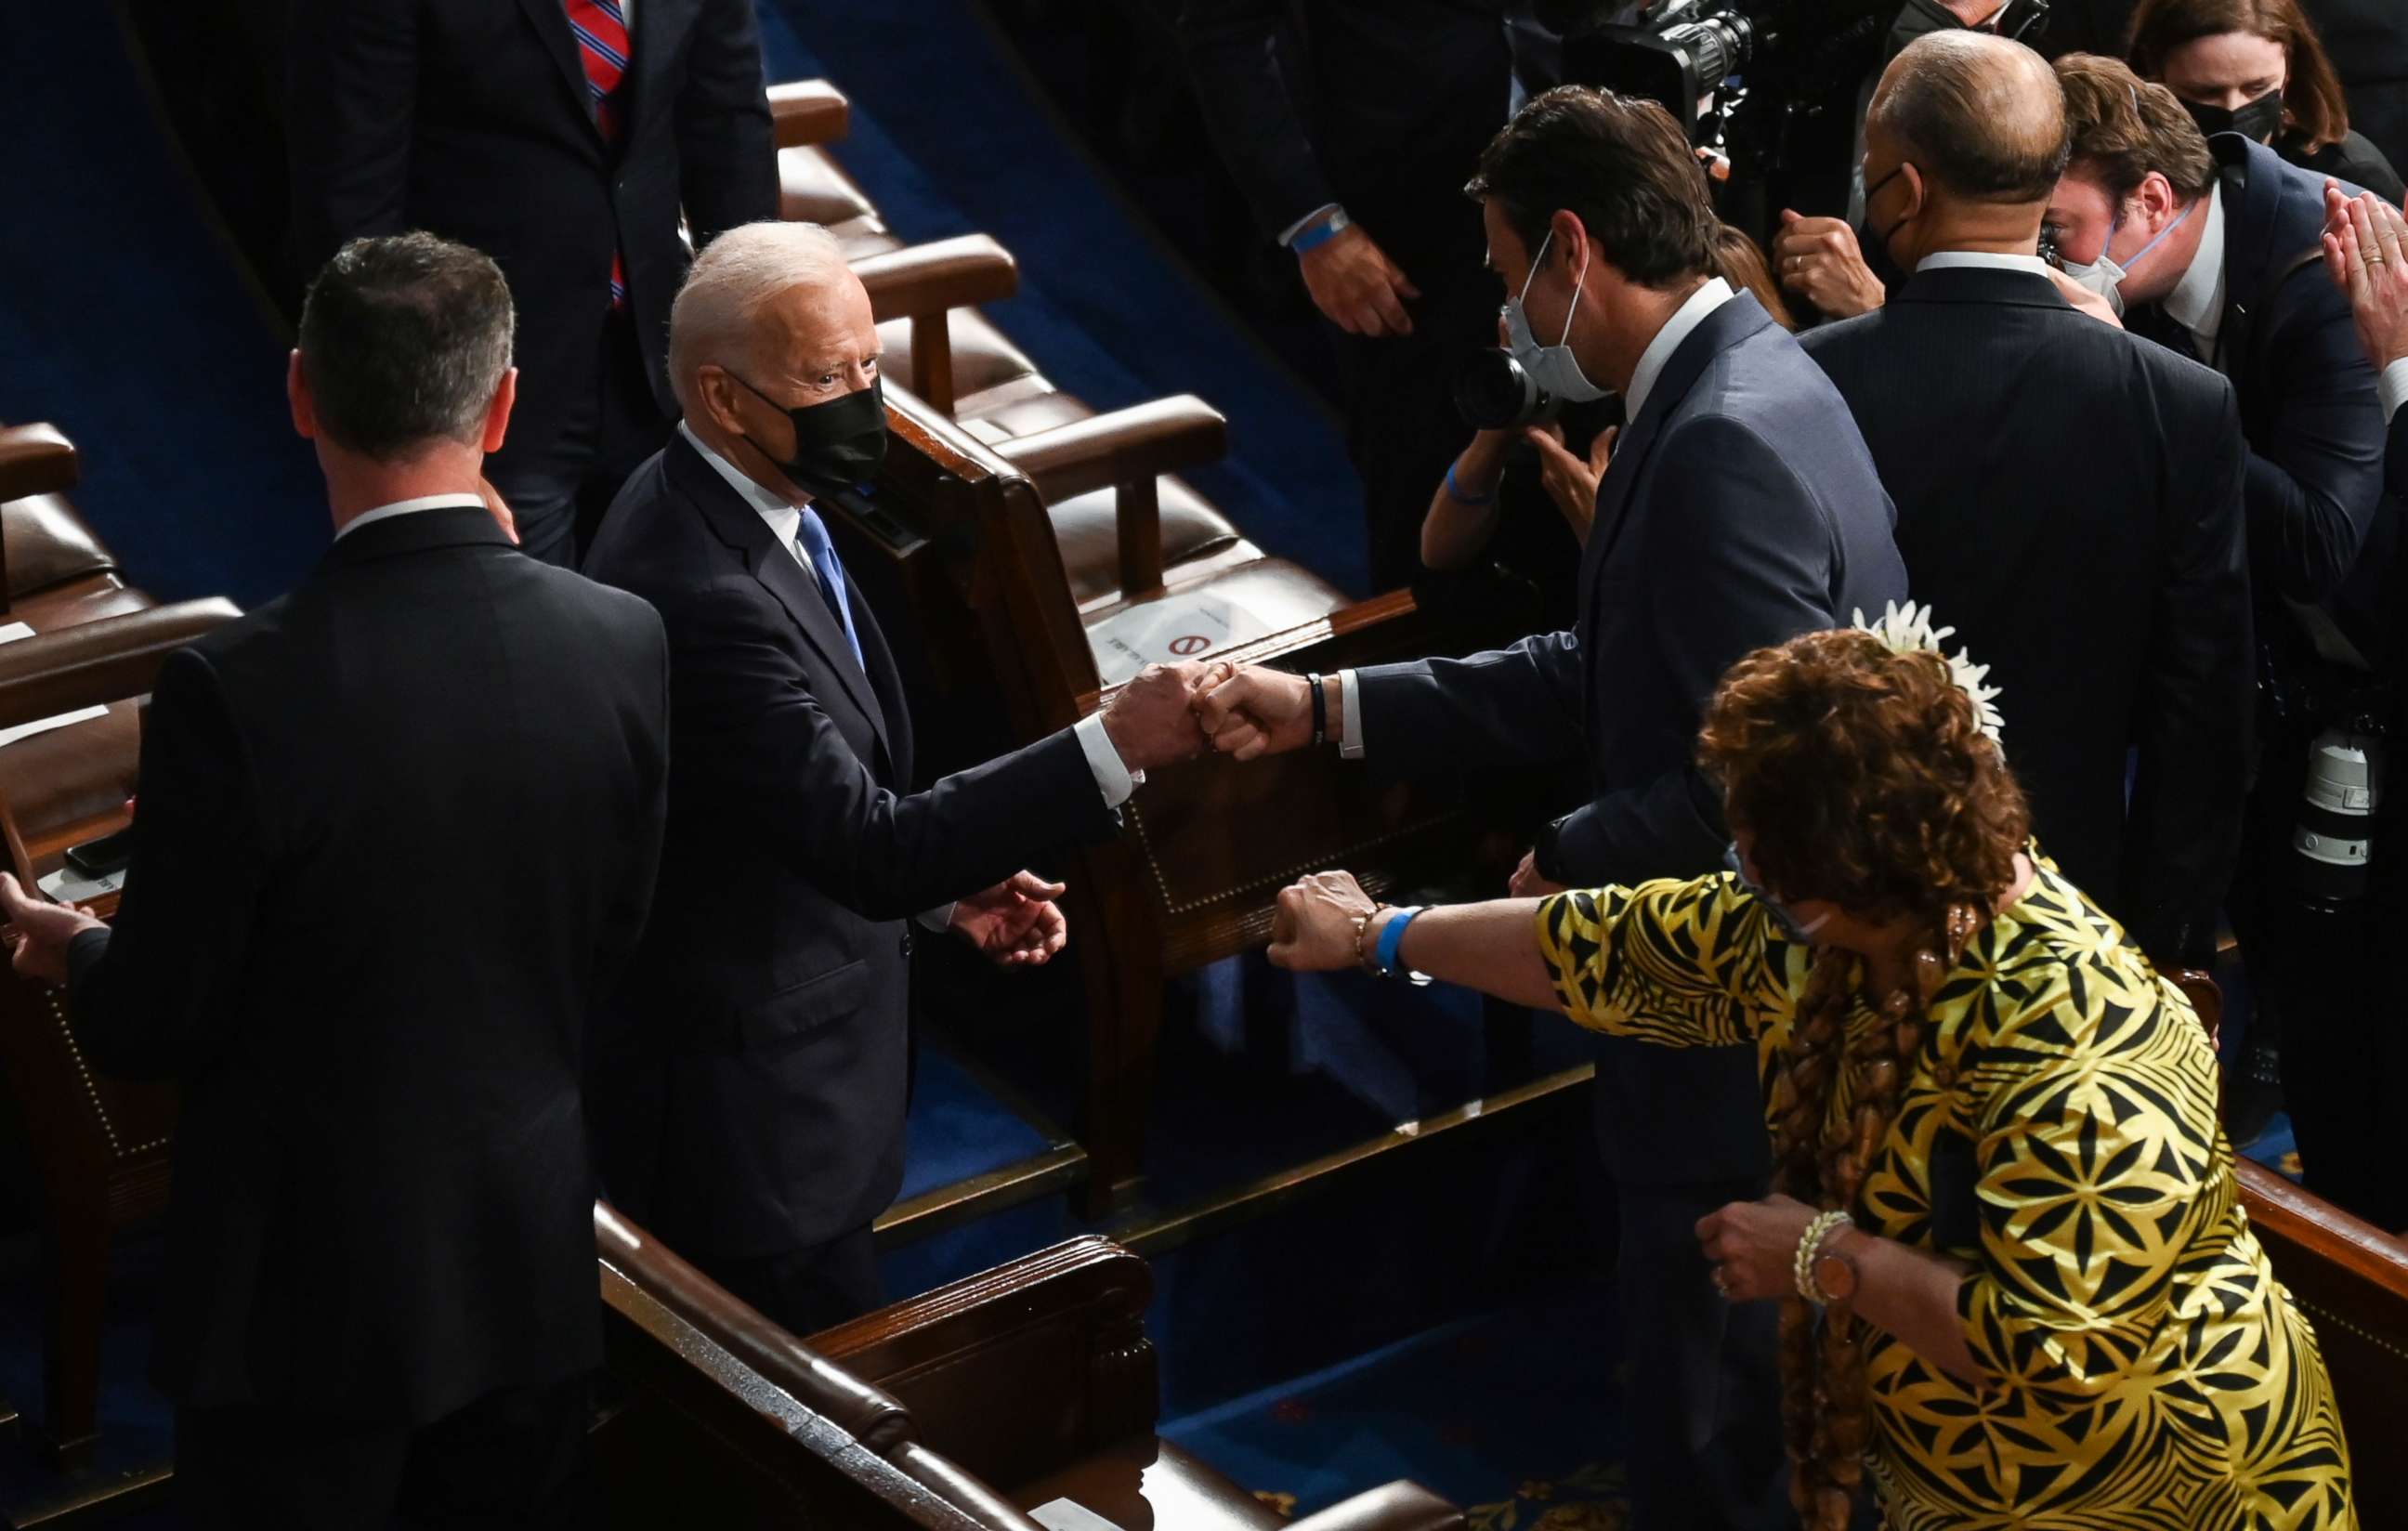 PHOTO: President Joe Biden arrives to address a joint session of Congress, April 28, 2021, in the House Chamber at the U.S. Capitol in Washington.